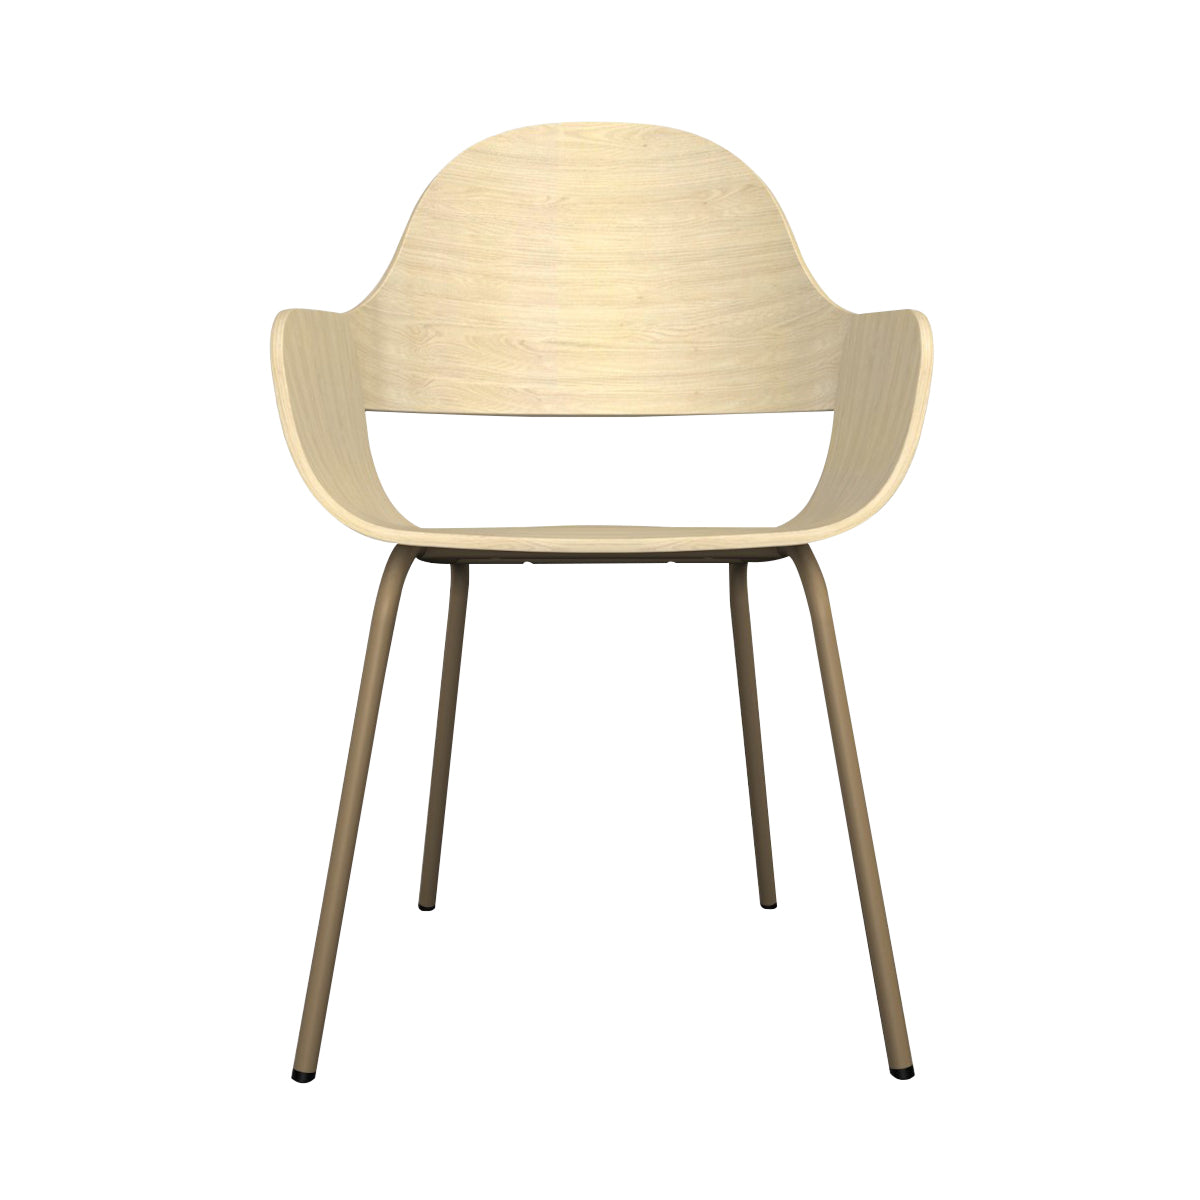 Showtime Nude Chair with Metal Legs: Natural Ash + Beige